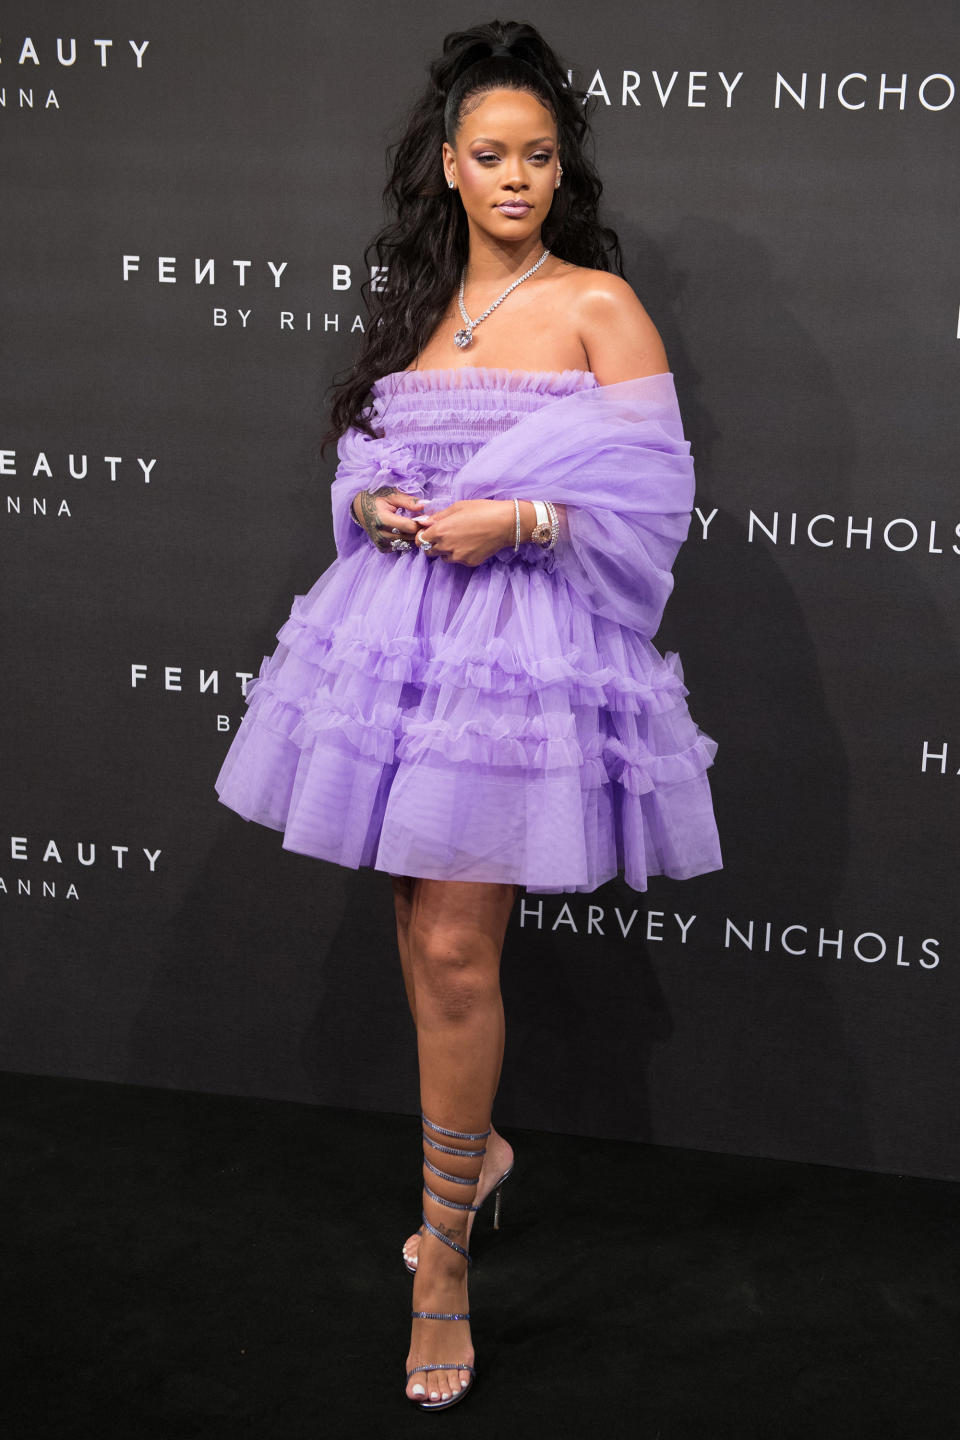 Wearing Molly Goddard at the Fenty Beauty London launch in September 2017